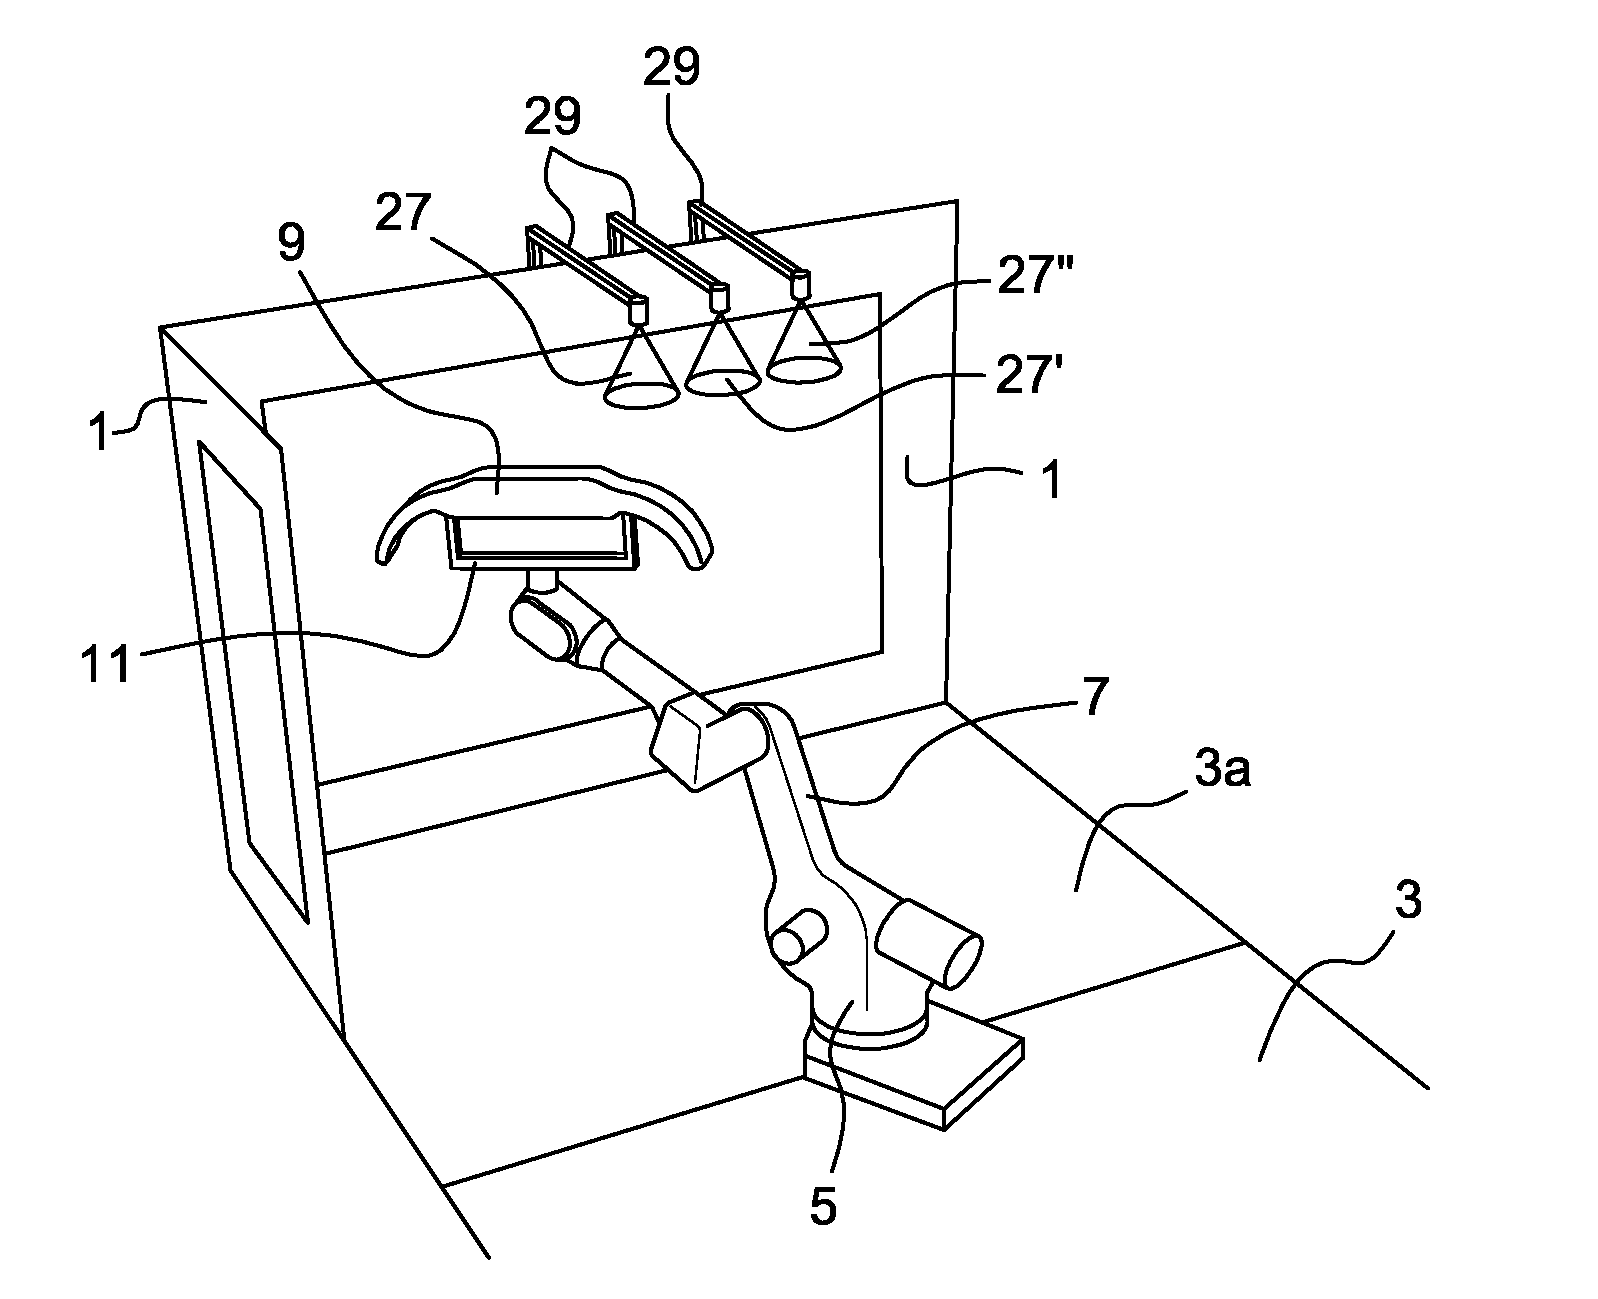 Method and system for painting a part of a motor vehicle body